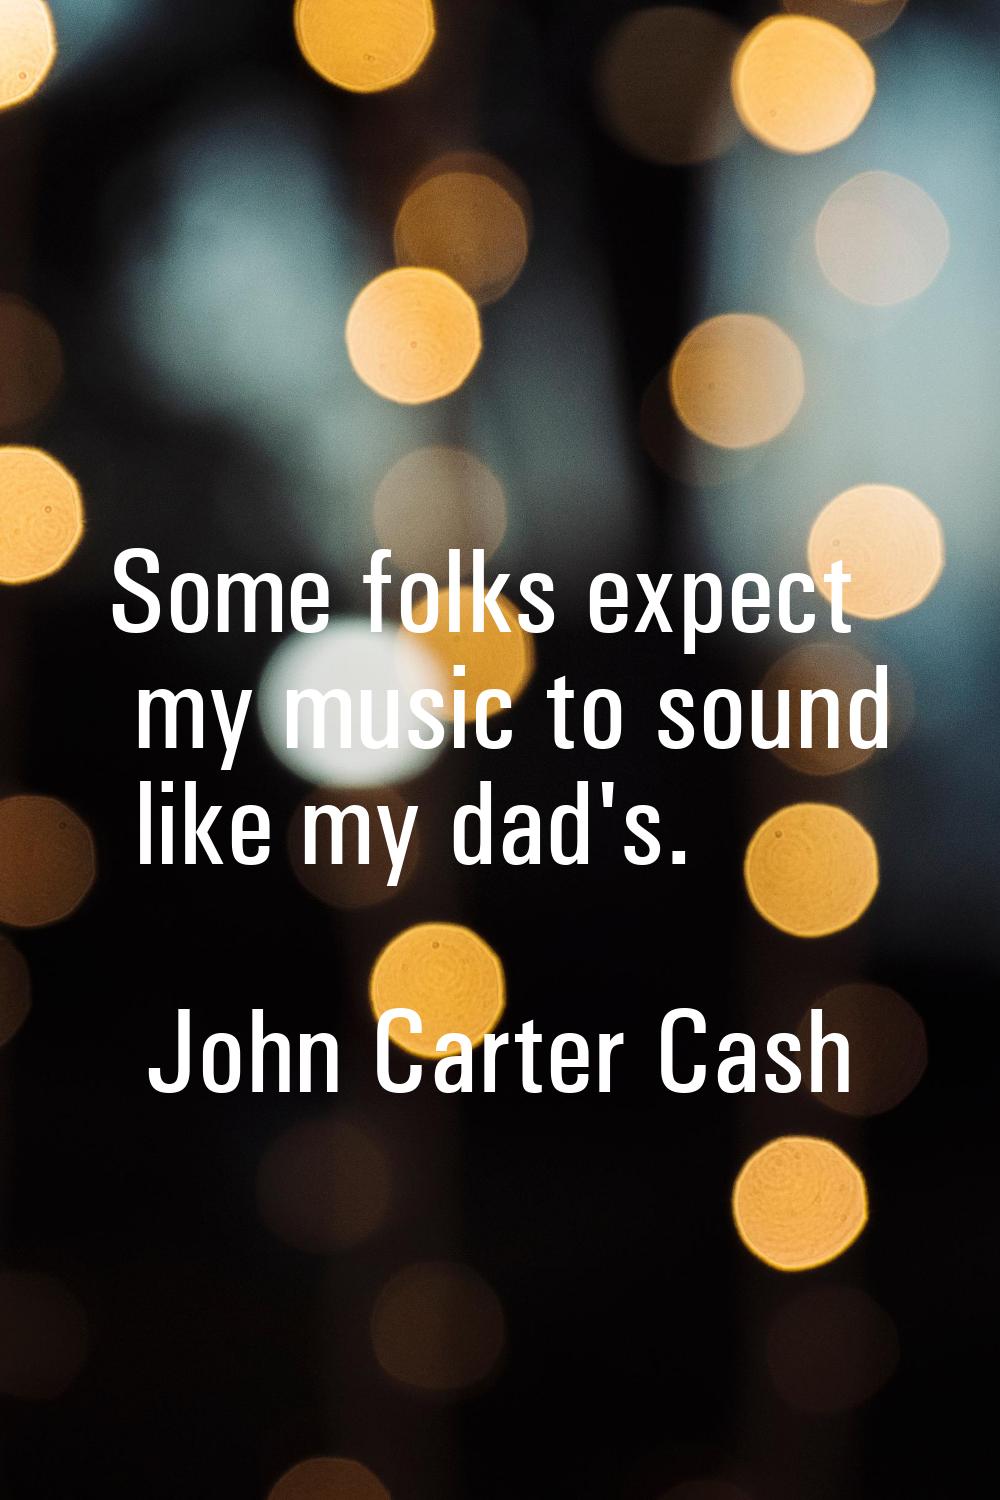 Some folks expect my music to sound like my dad's.